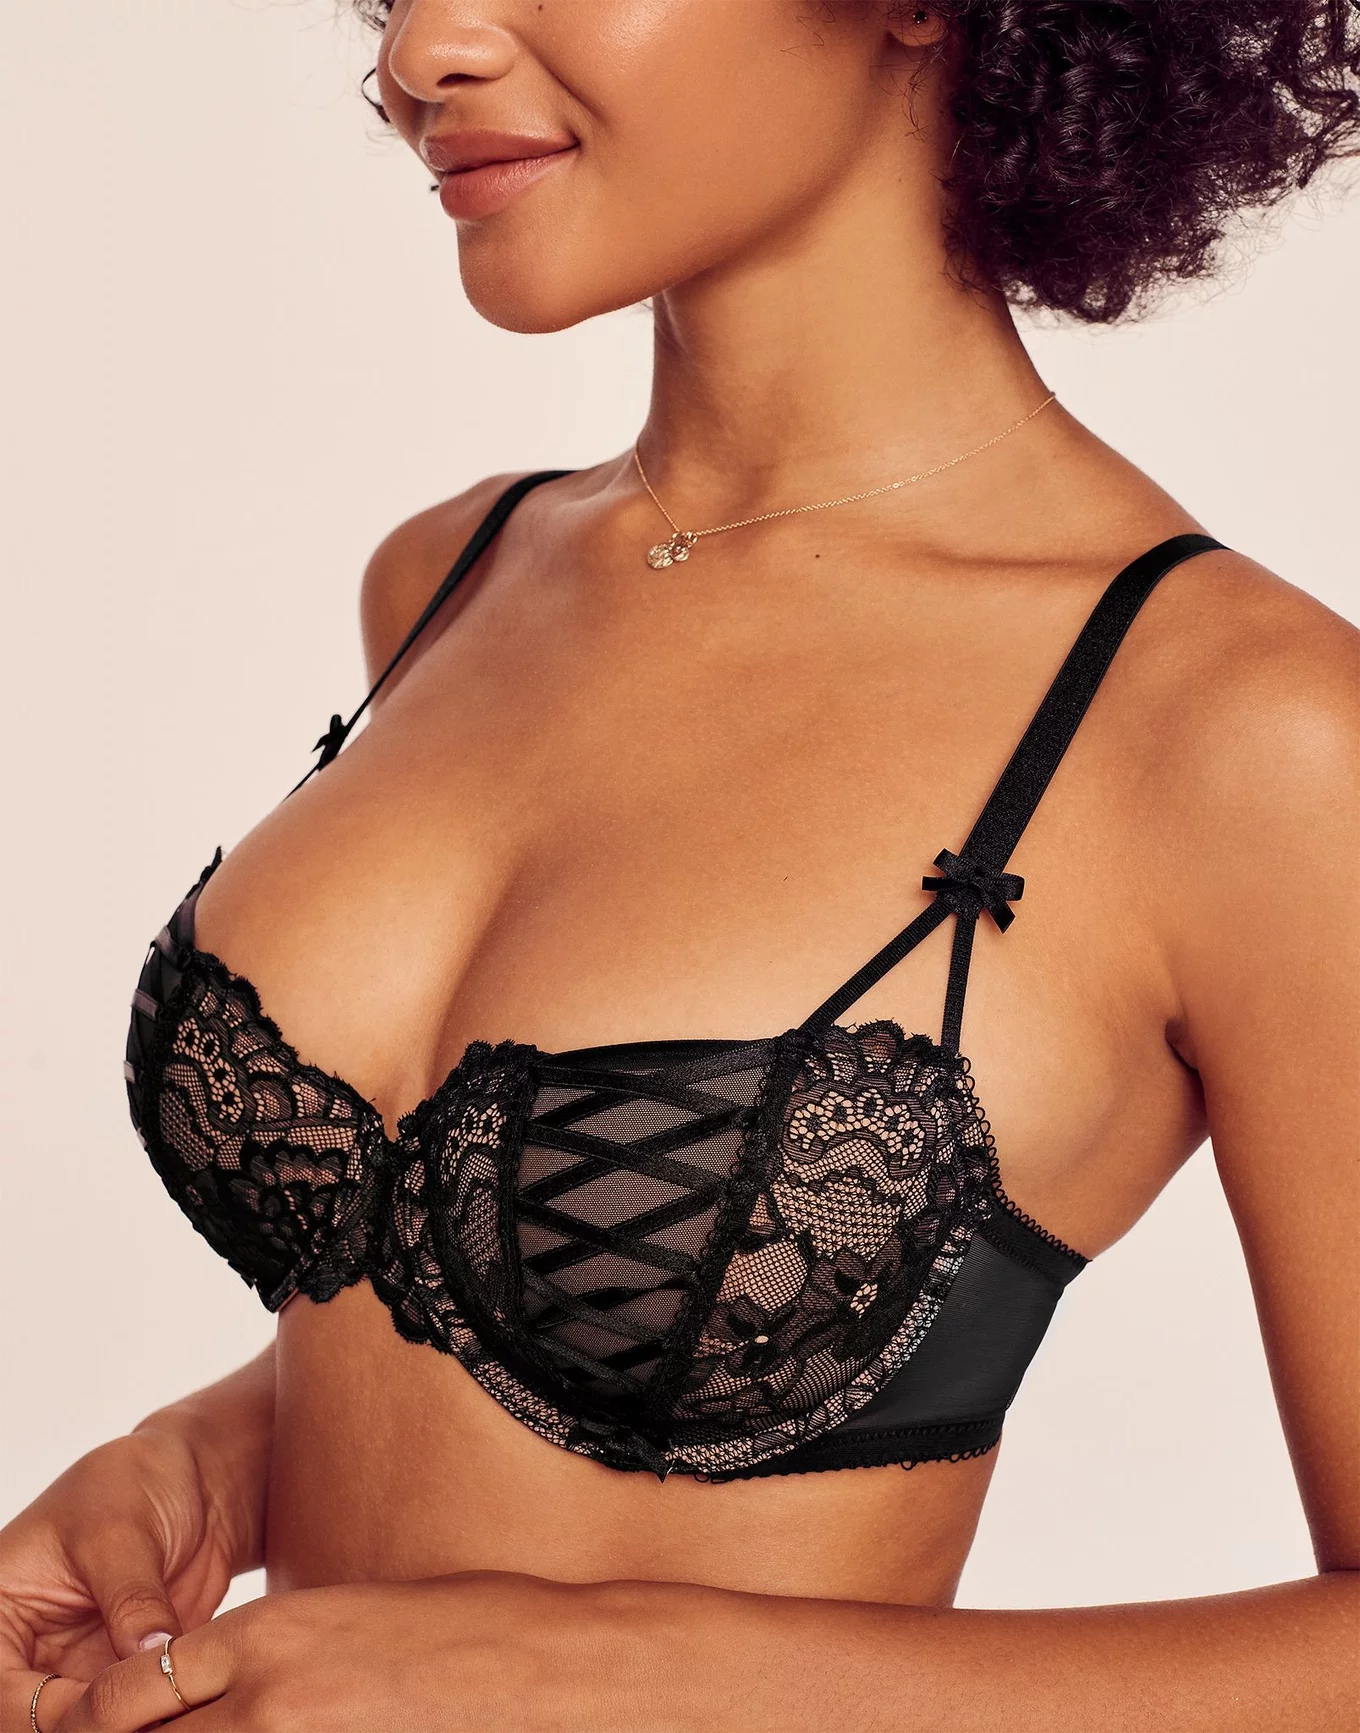 Adore Me Bras for sale in Central Nyack, New York